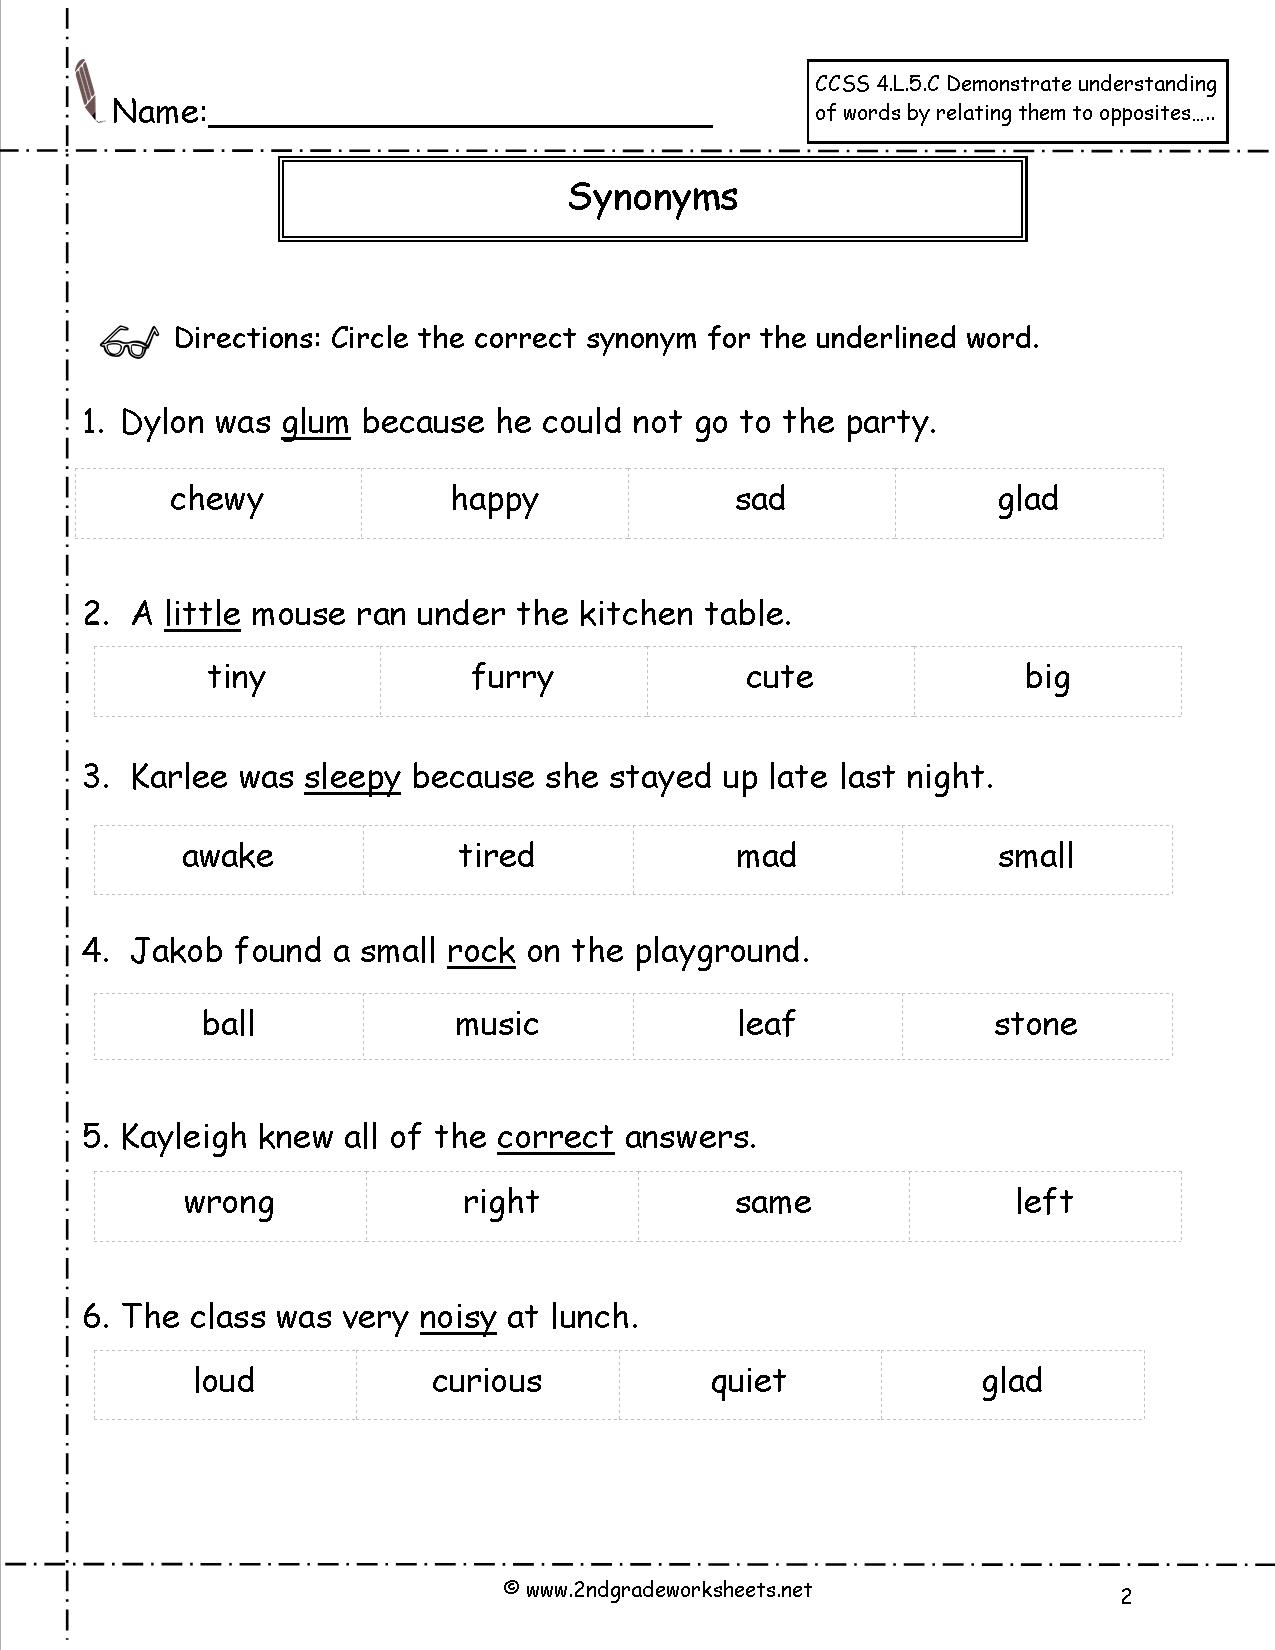 Synonyms Worksheet 2nd Grade 579312